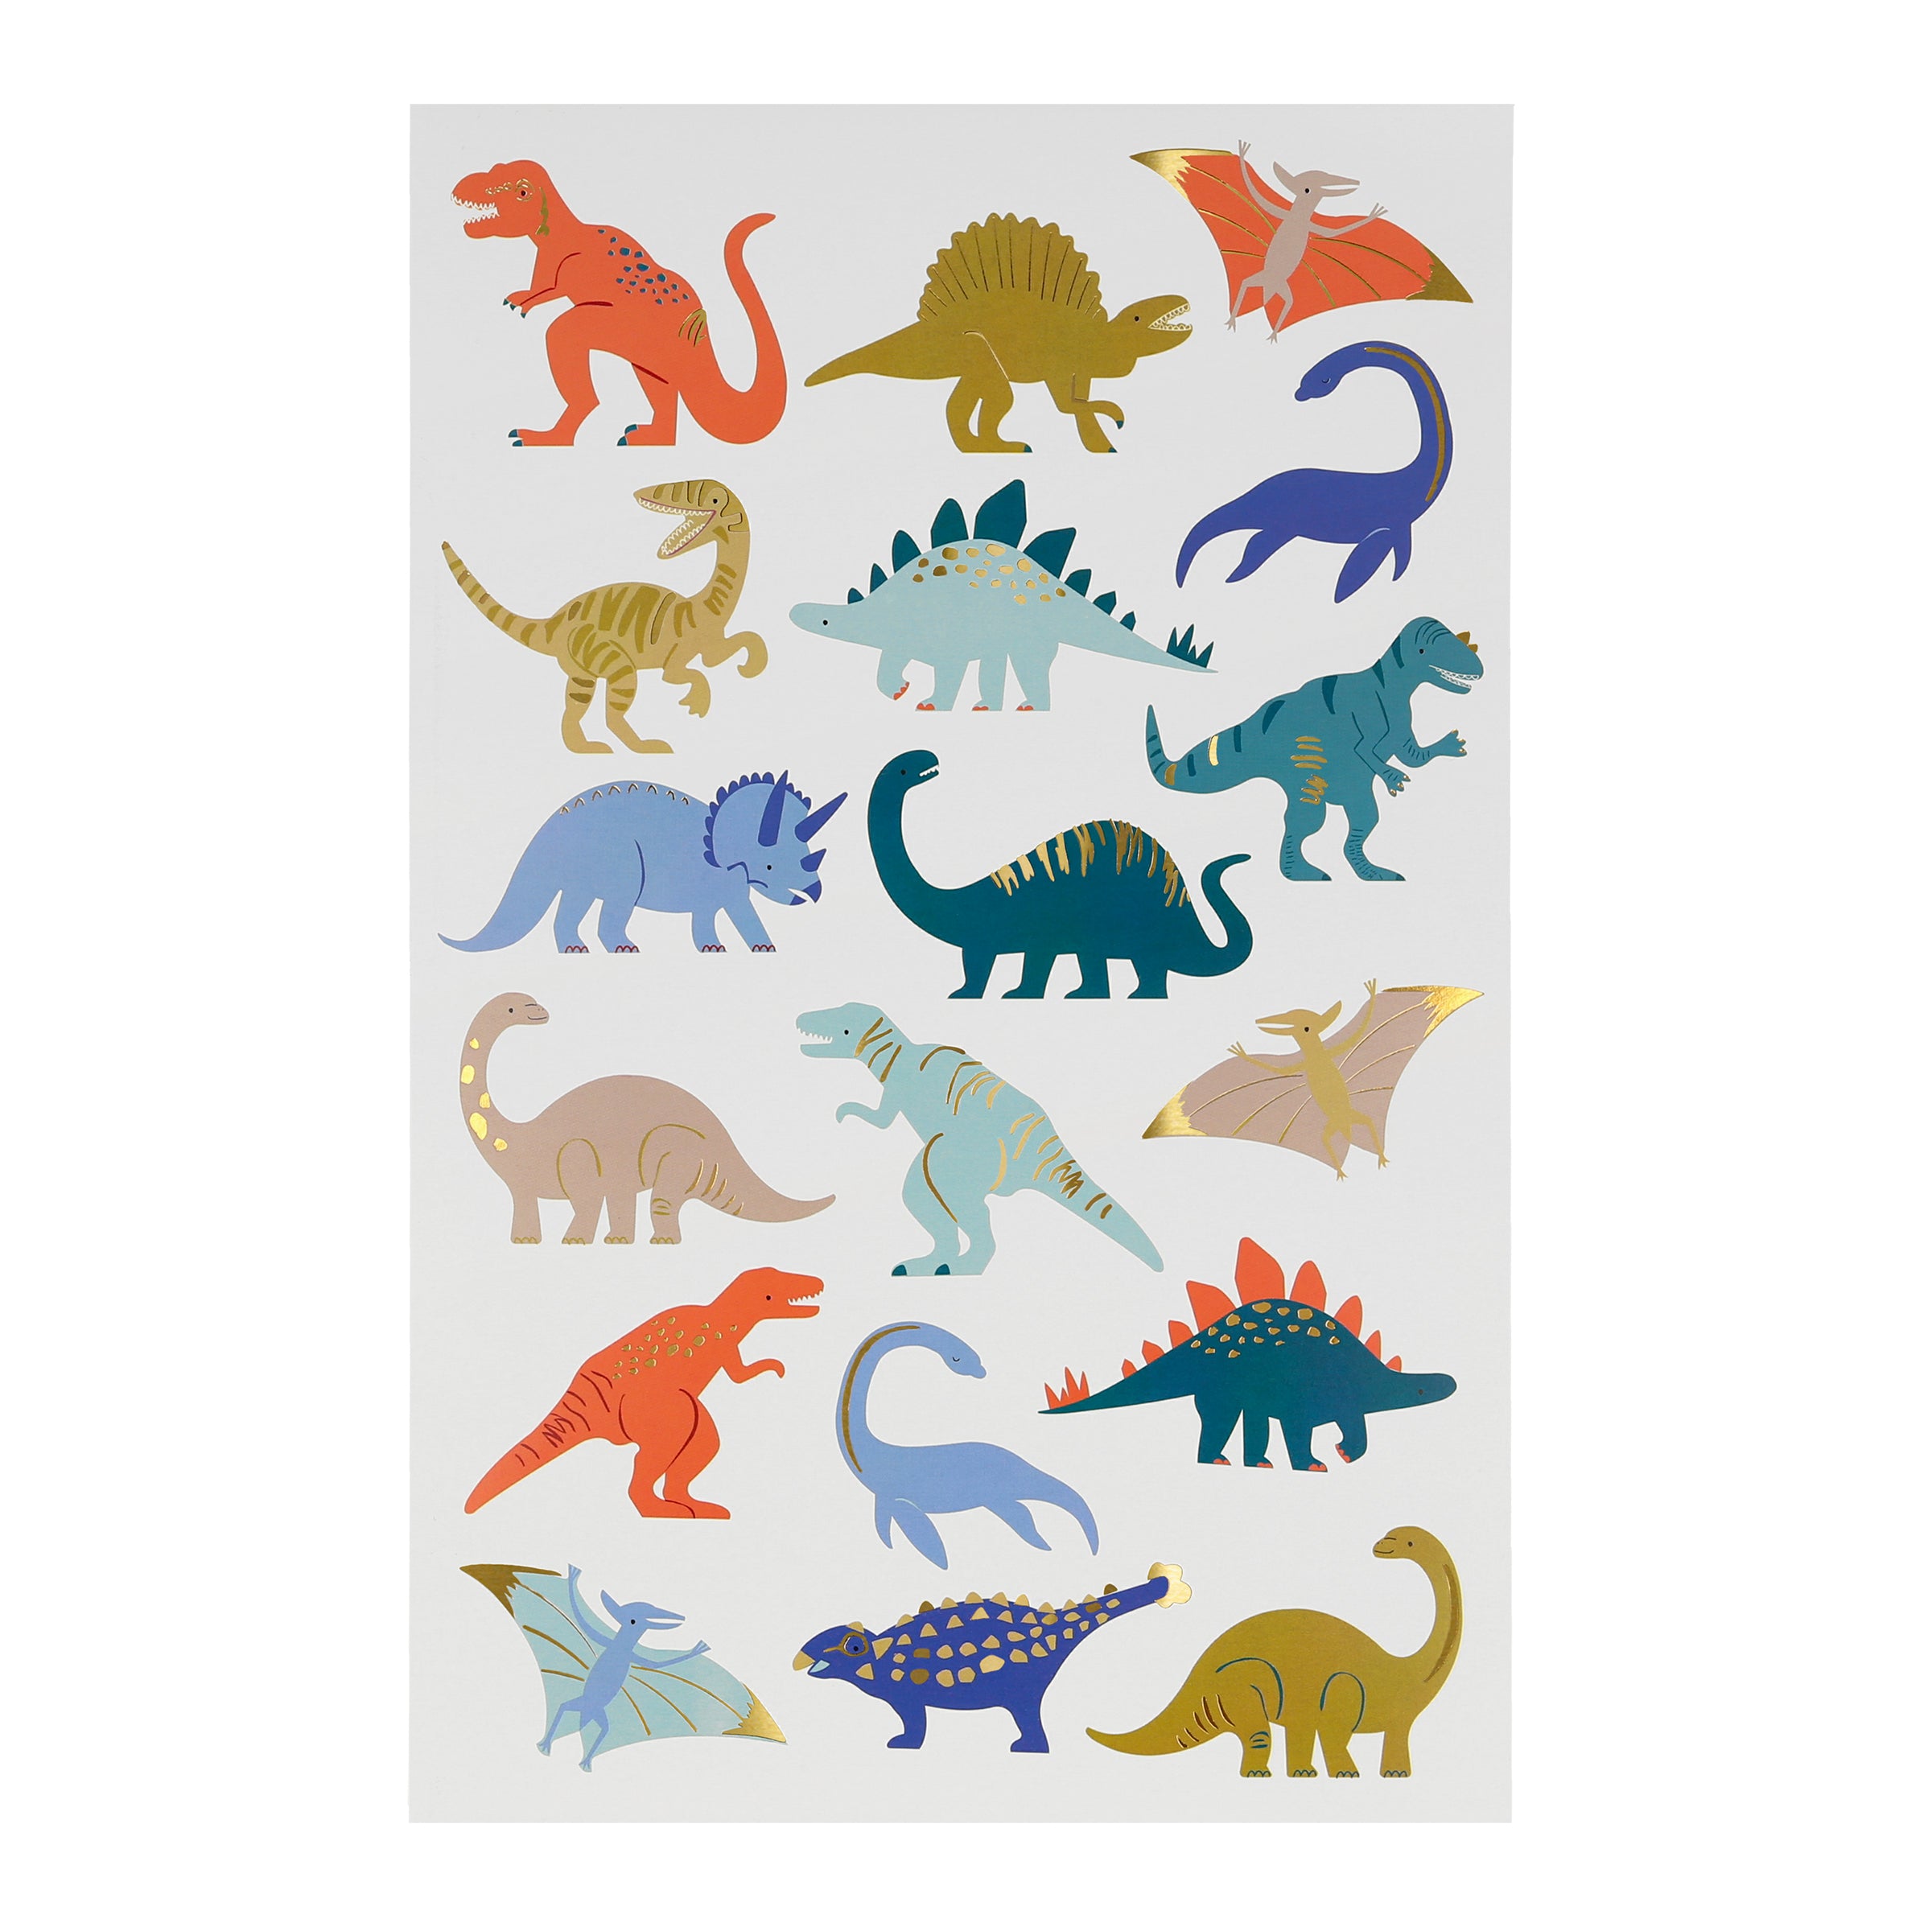 Our cute dinosaur tattoos feature bright colors and shiny gold foil details.